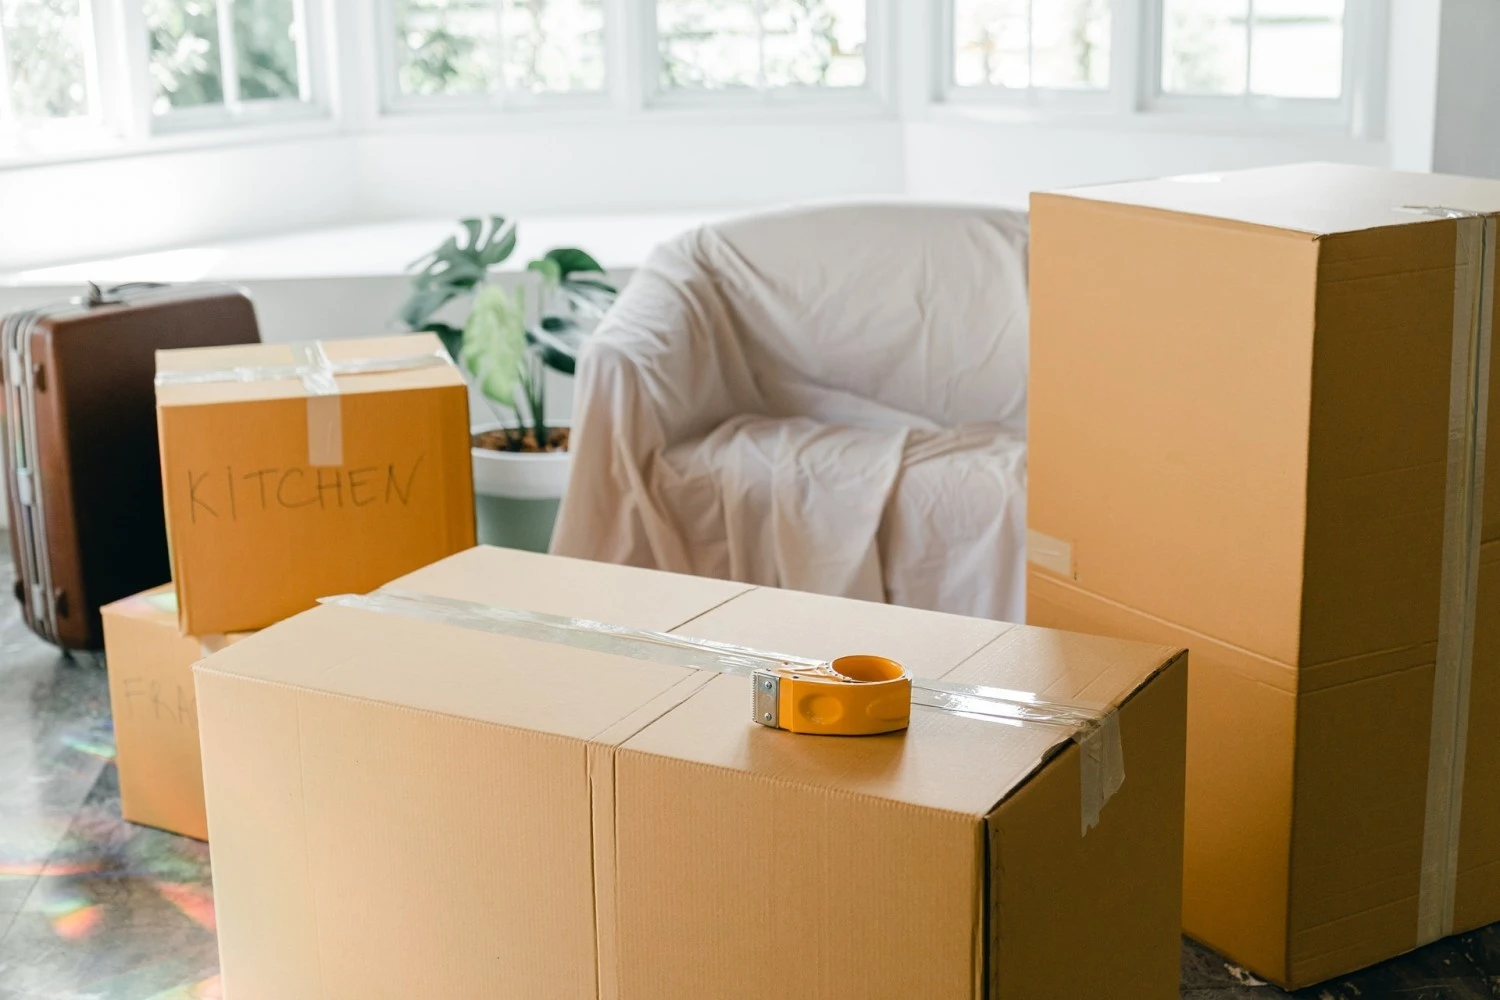 4 Tips for an Eco-Friendly Home Move